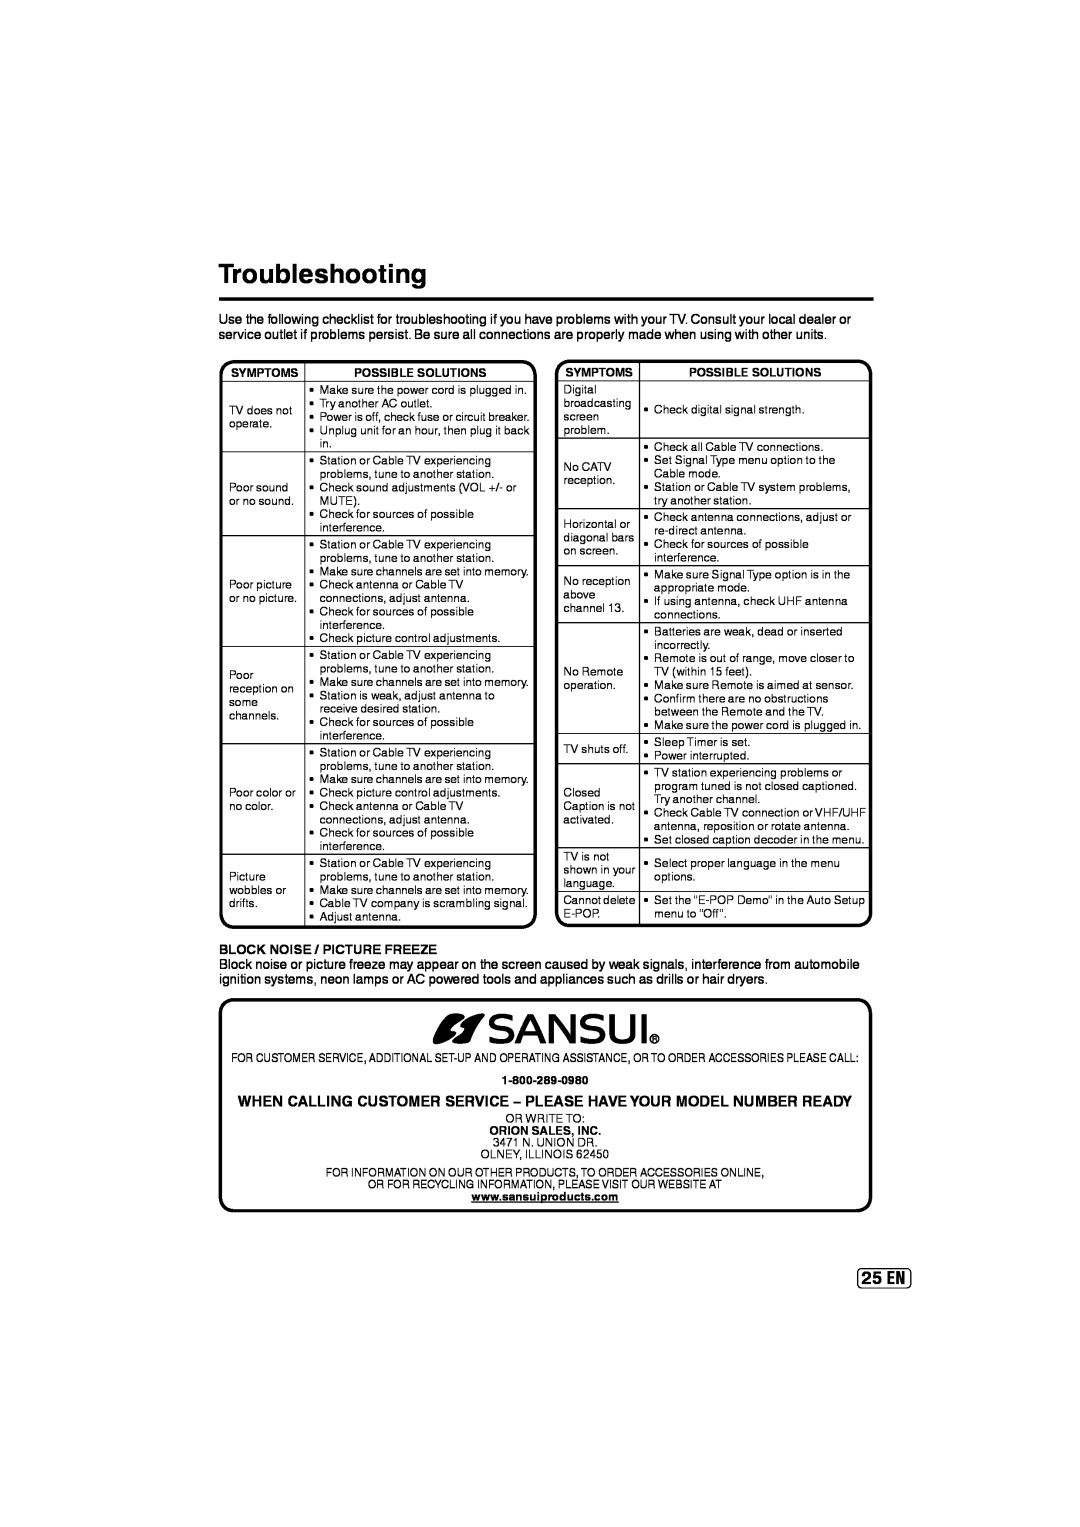 Sansui SLED2237 Troubleshooting, 25 EN, When Calling Customer Service - Please Have Your Model Number Ready, Symptoms 